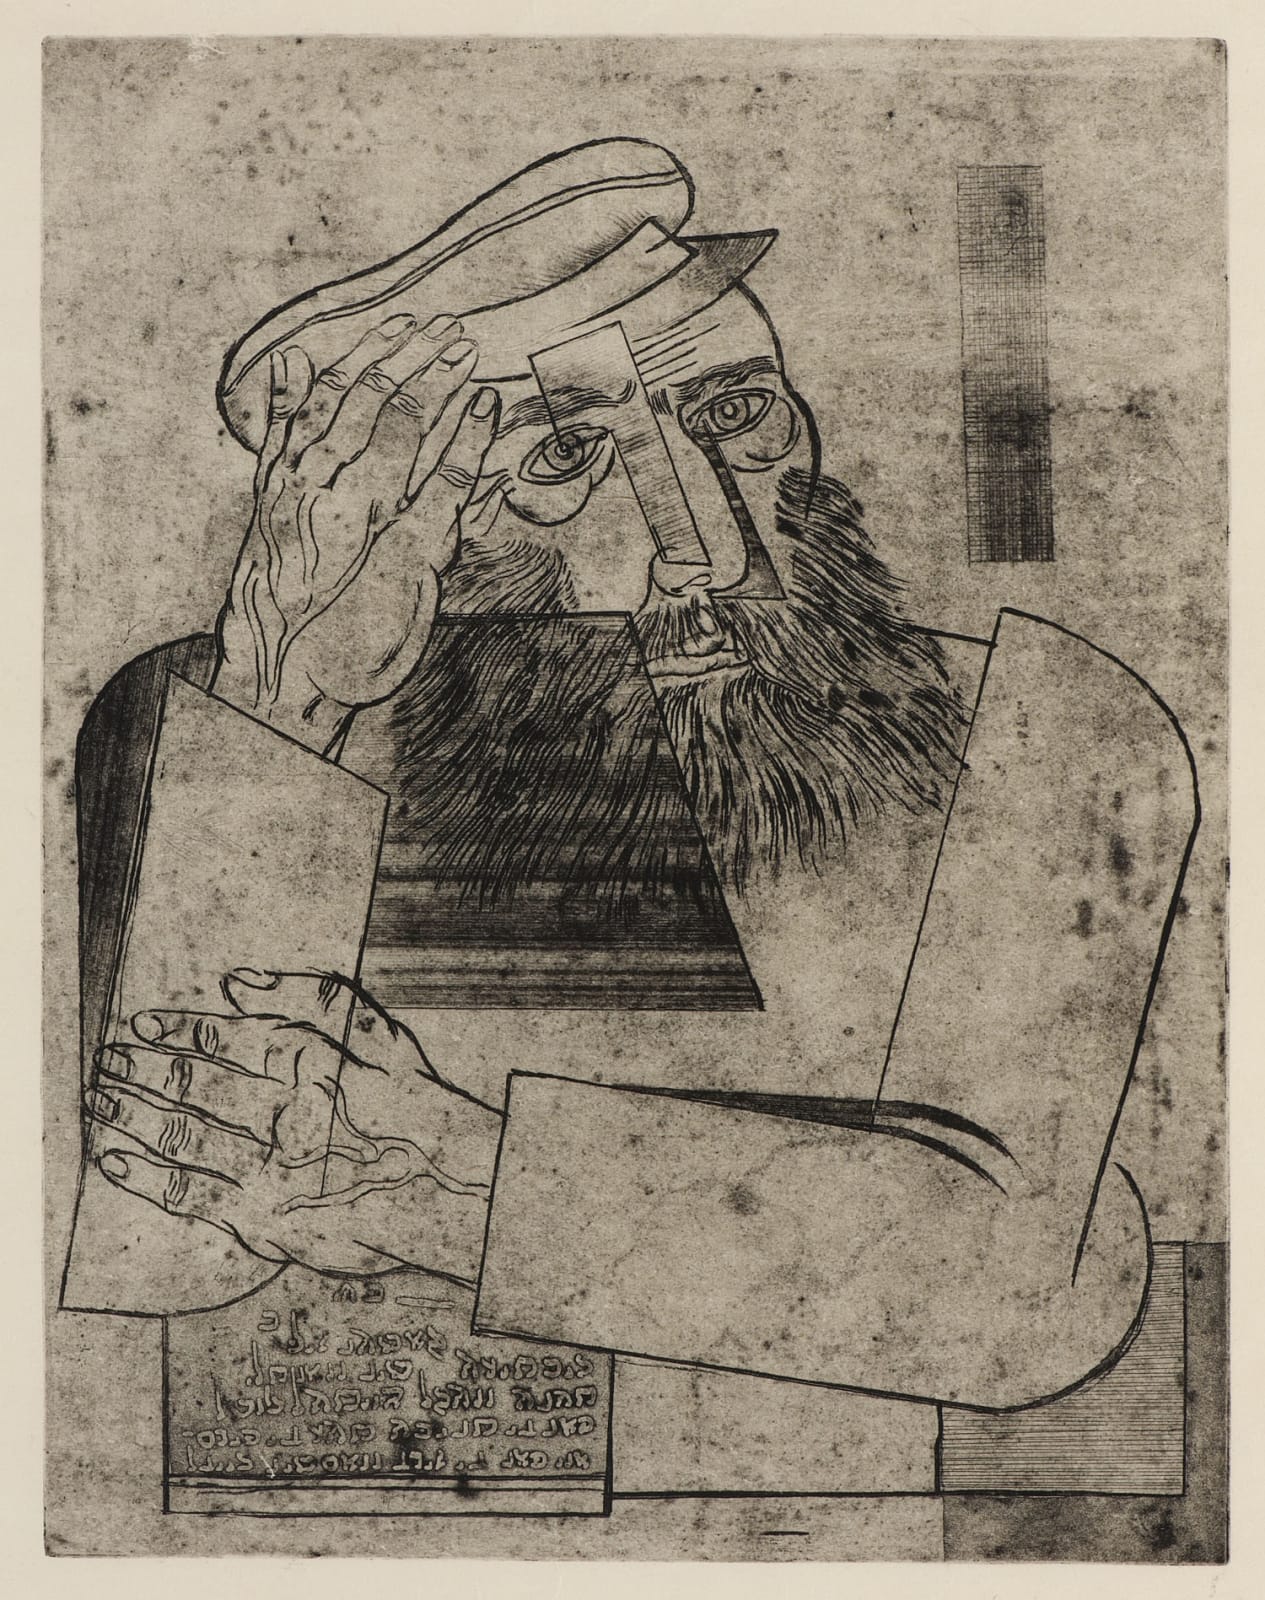 Jankel Adler (1895-1949) Ein Jude c.1926 Etching on paper 44.5 x 34.7 cm Ben Uri Collection © Jankel Adler estate To see and discover more about this artist click here